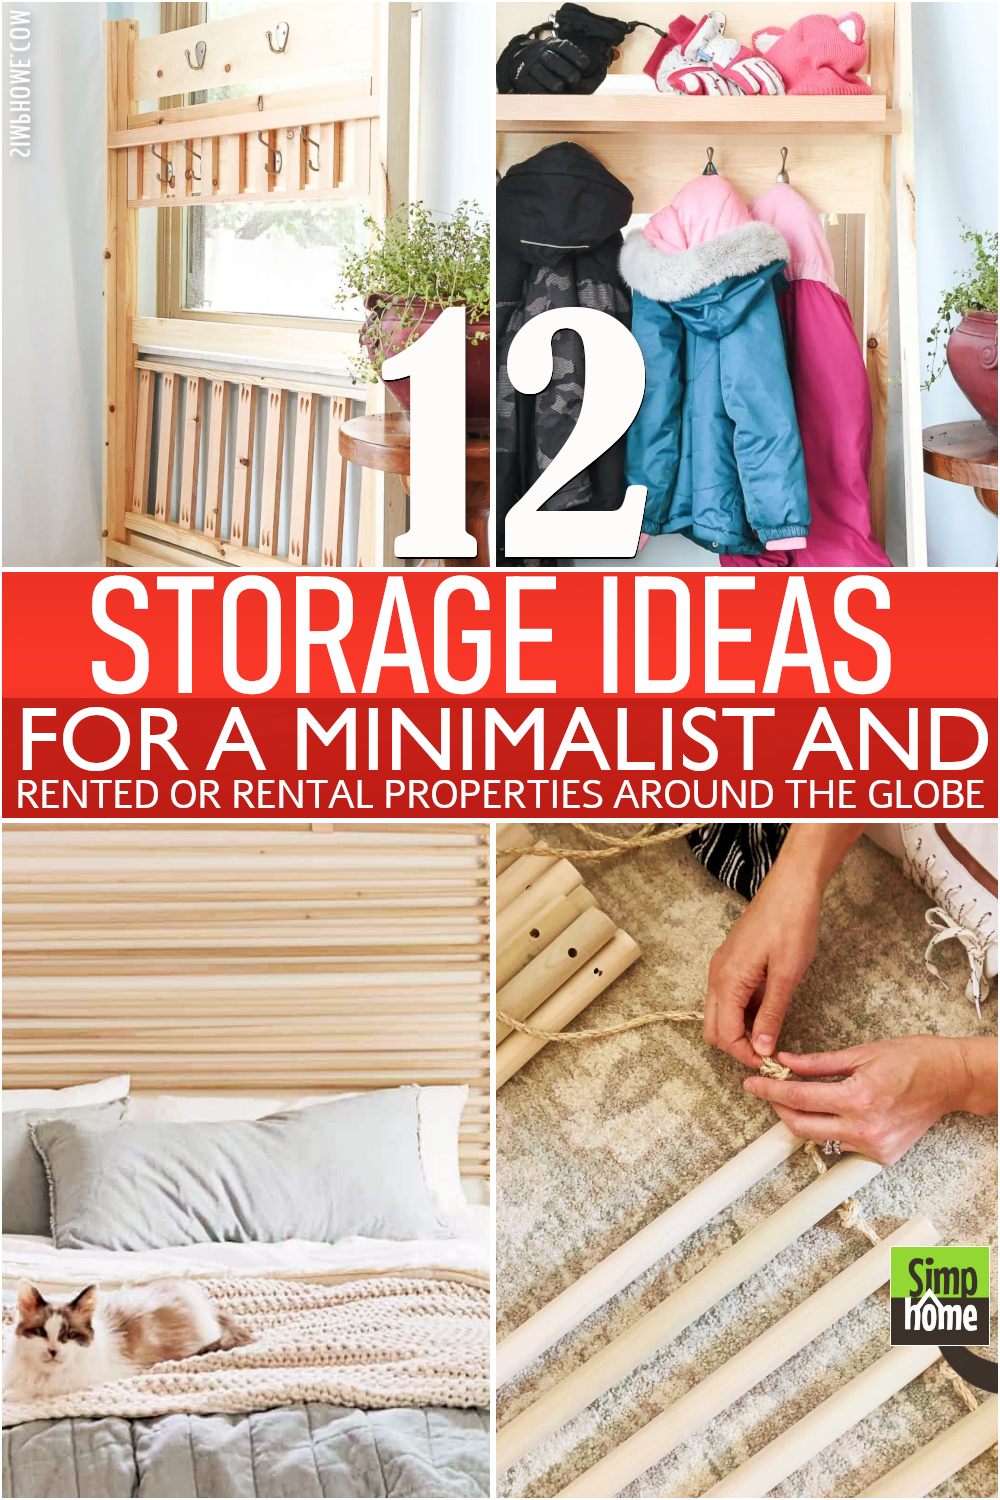 Storage ideas for a Minimalist and Rental House